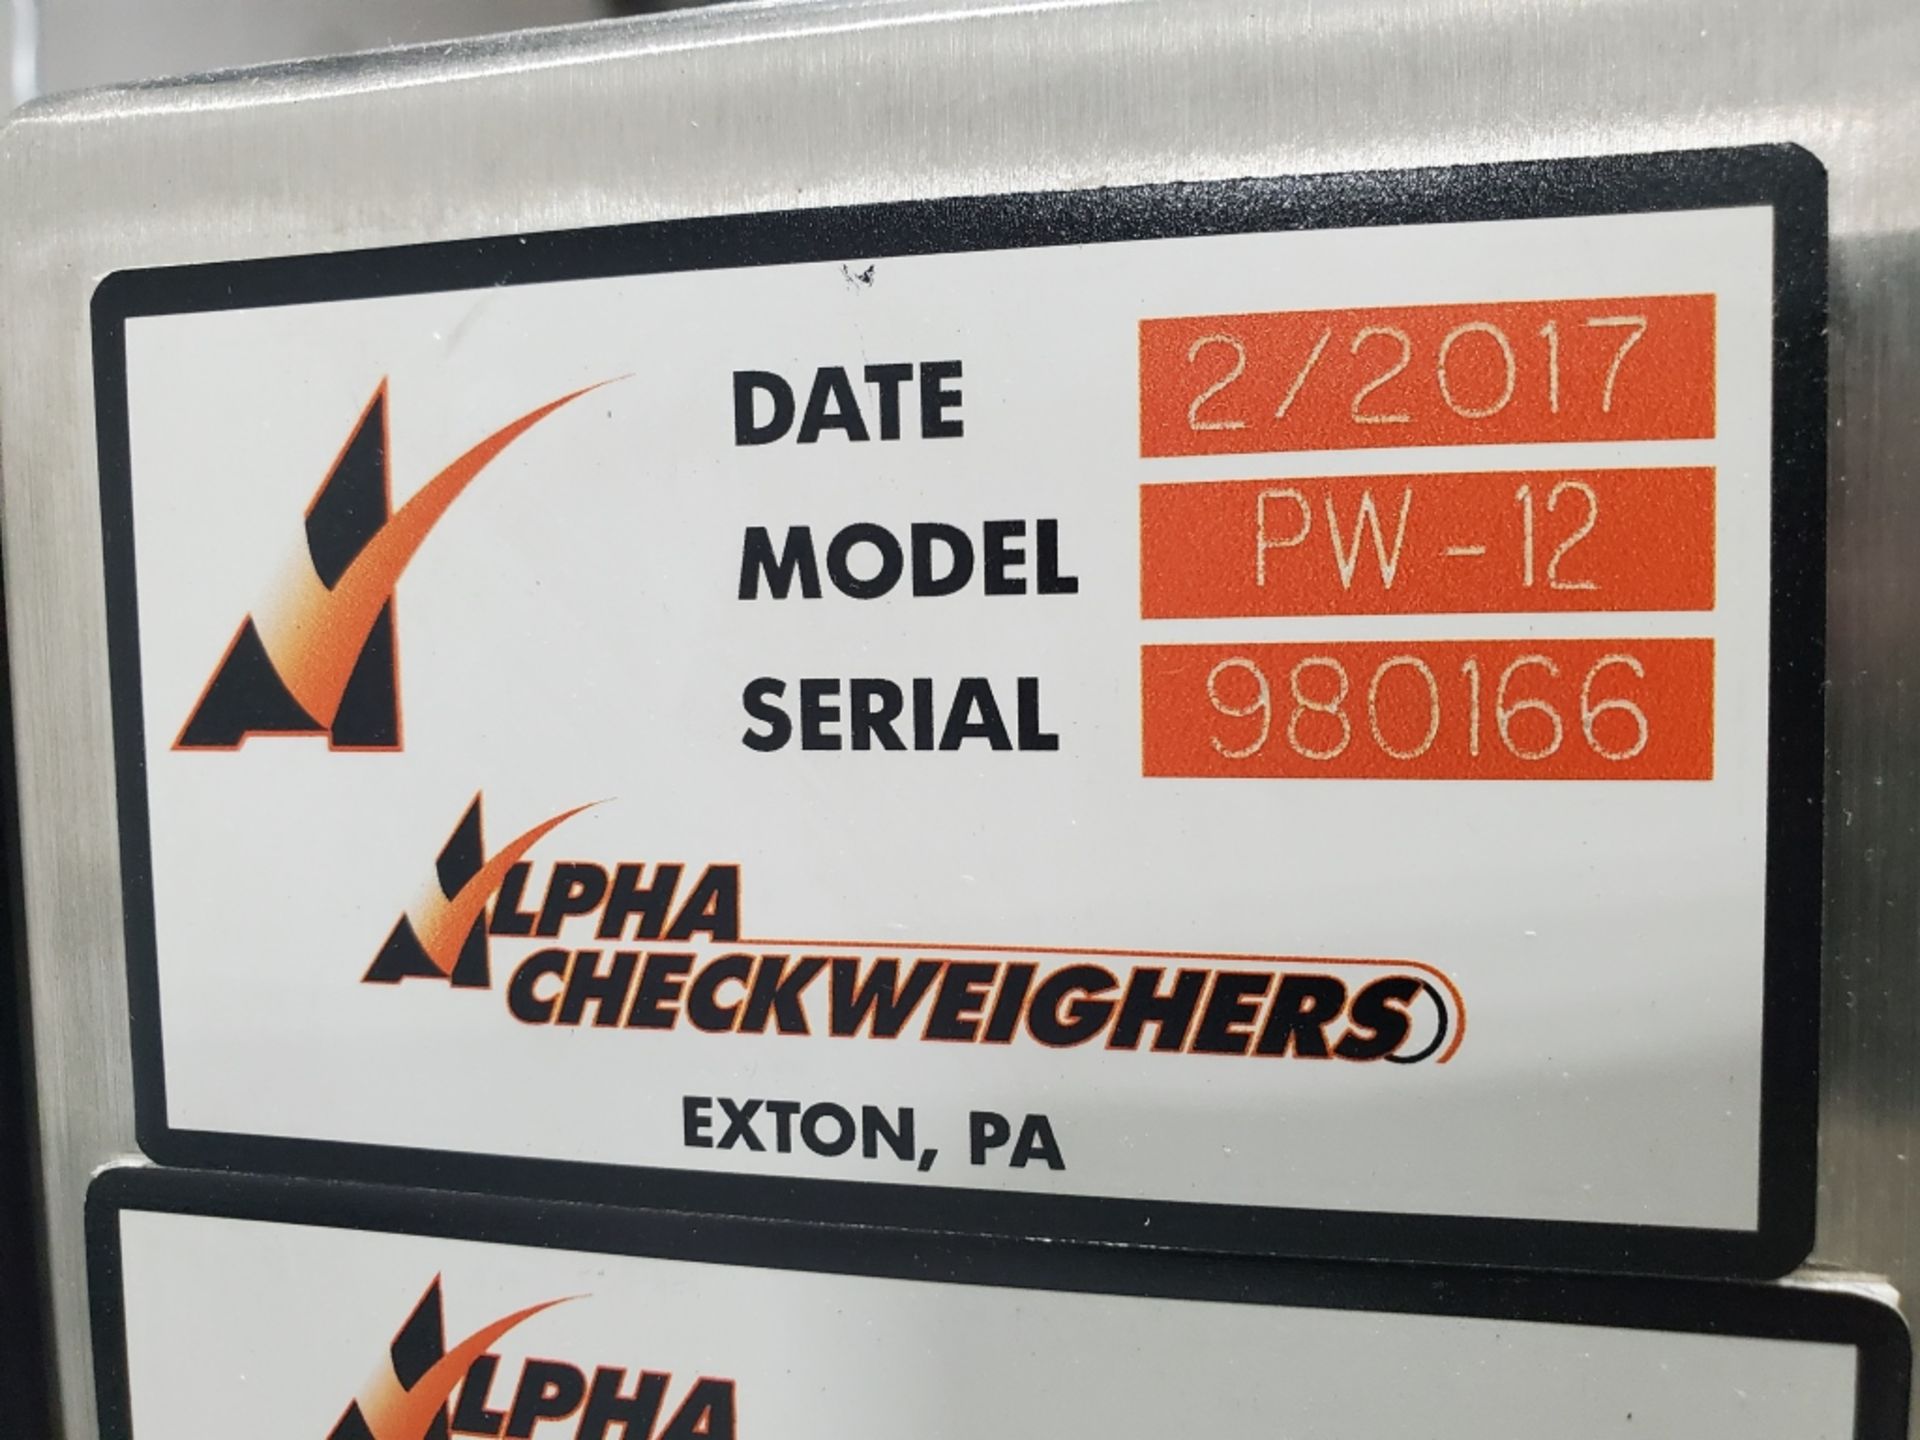 All-Fill Alpha CheckWeighers Model CW-10 Check Weigher sn 195169 - Image 2 of 4